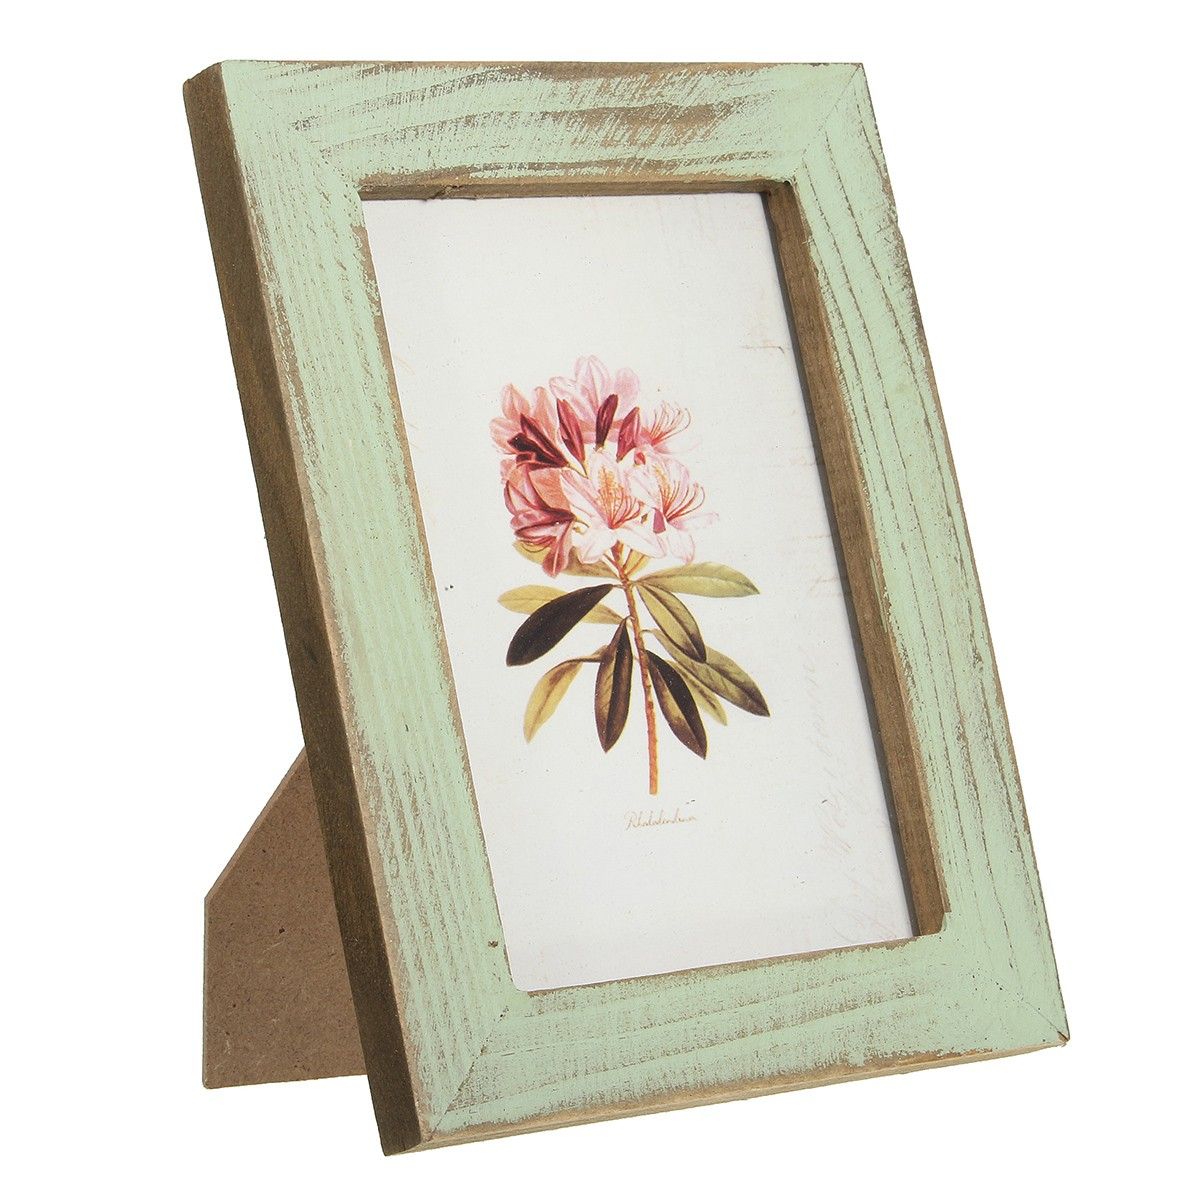 Vintage-5inch-Solid-Wood-Photo-Picture-Frame-Wall-Hanging-Shabby-Chic-Room-Decor-1252351